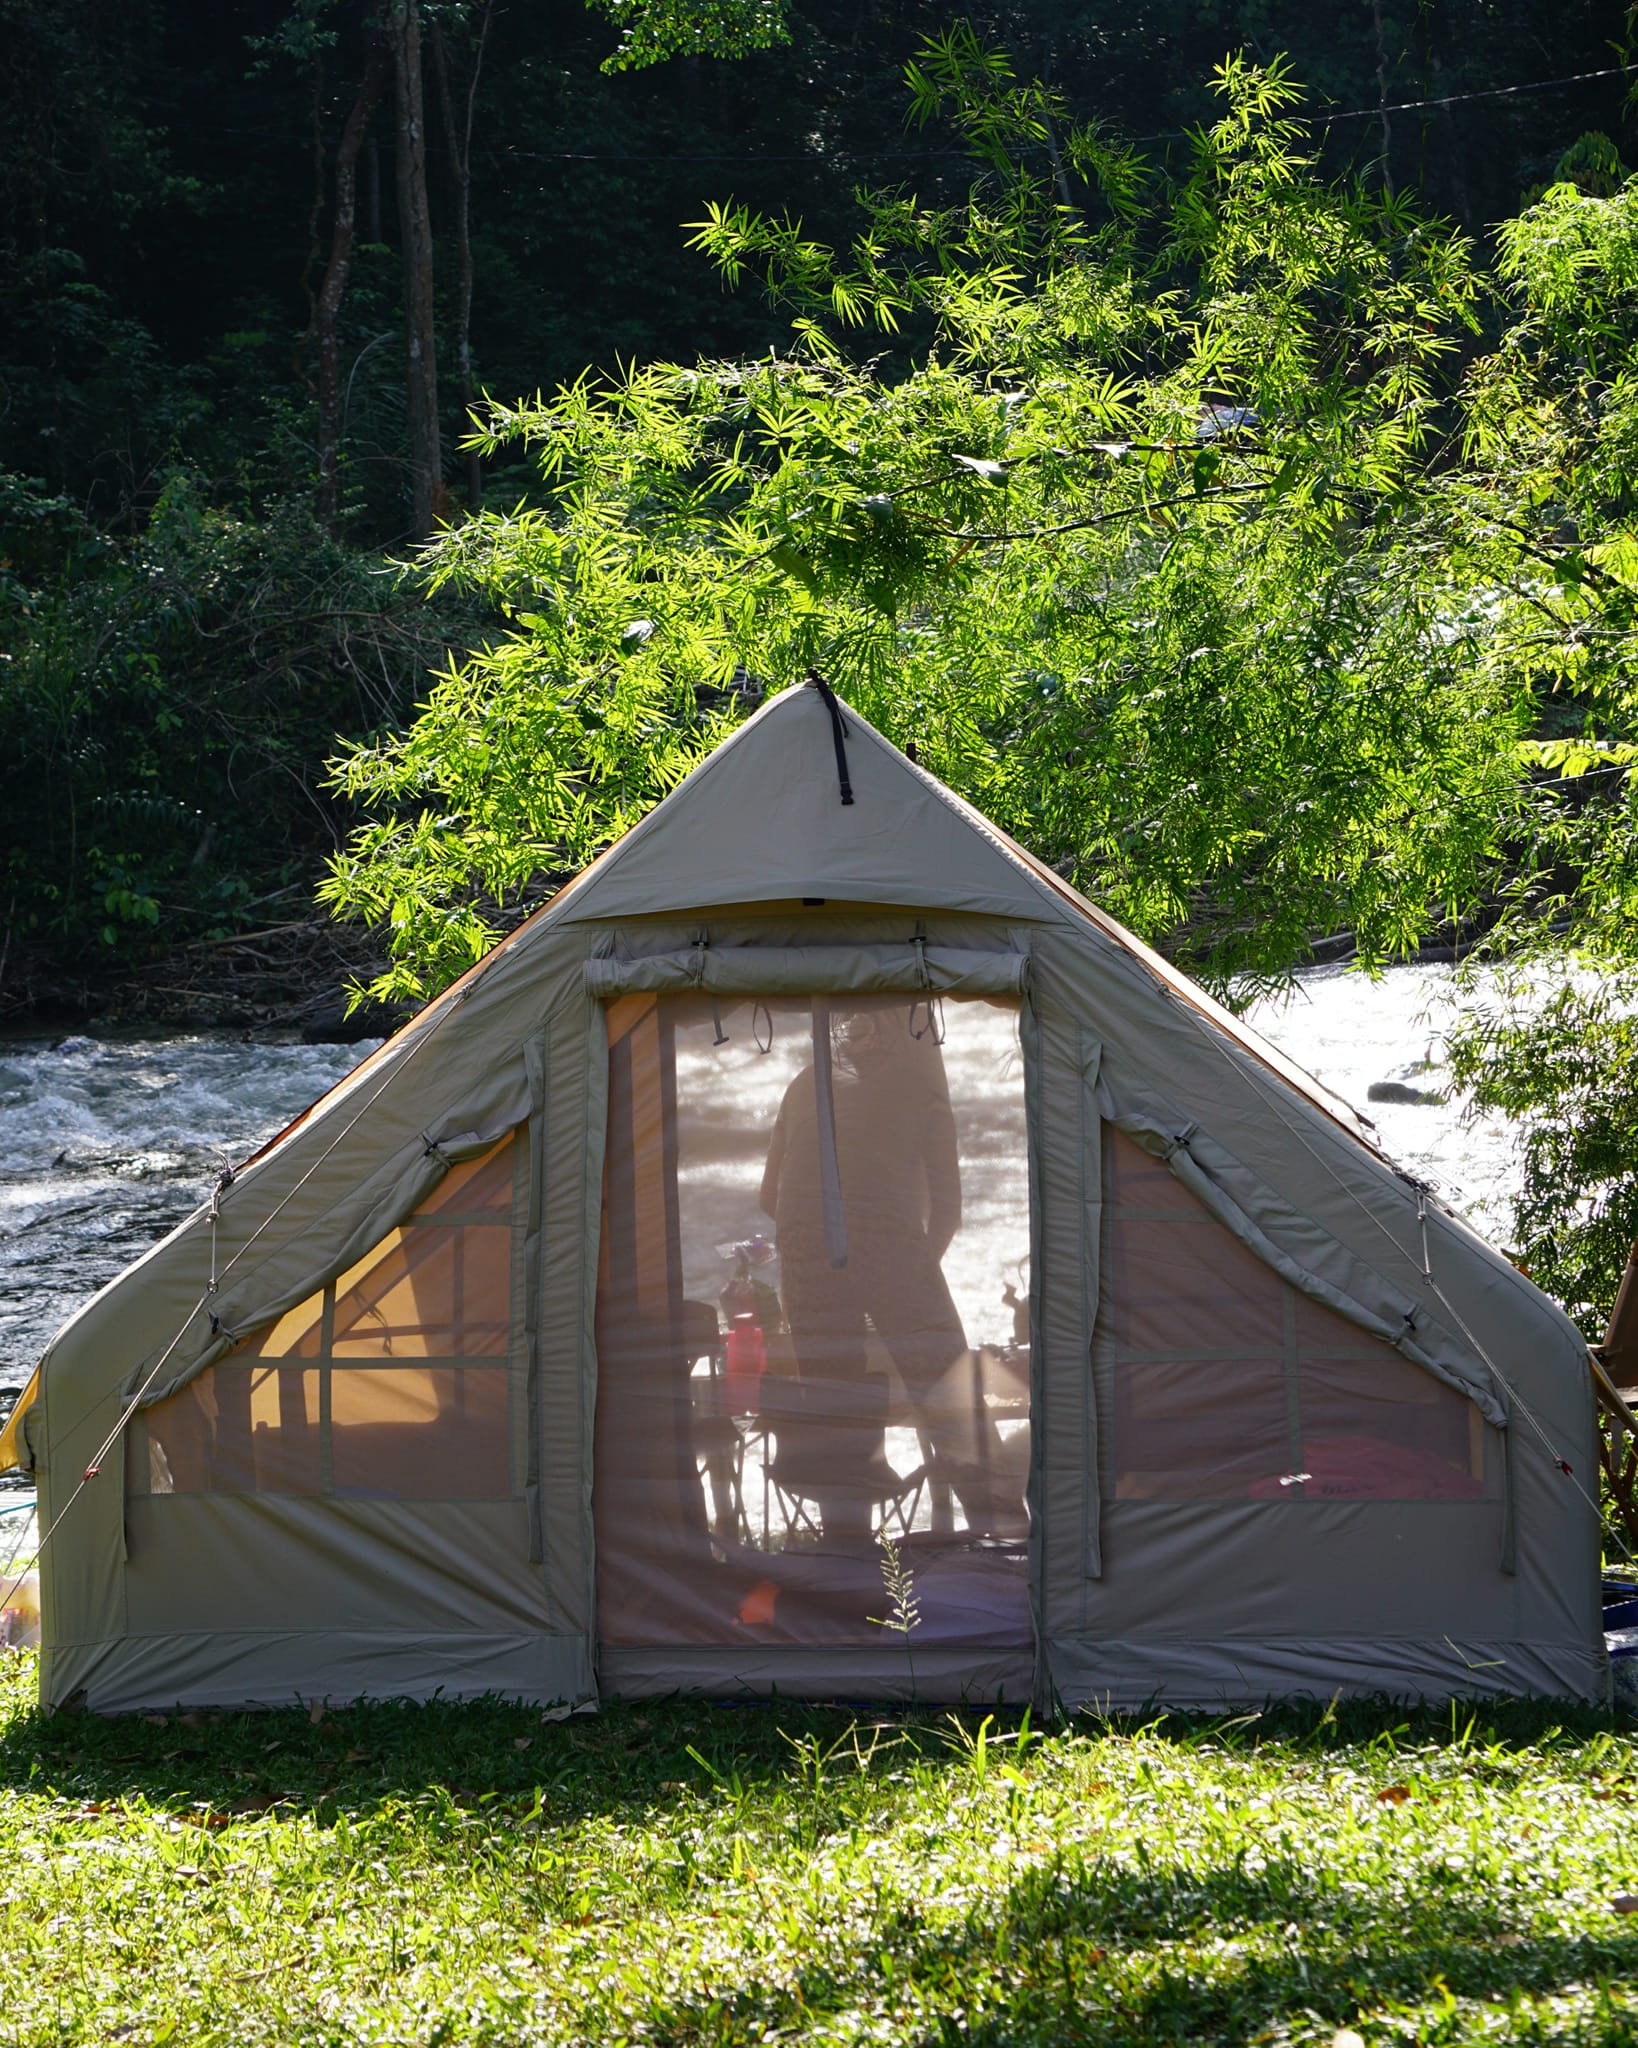 21 Scenic Campsites In Malaysia To Escape To When You Need A Break From ...